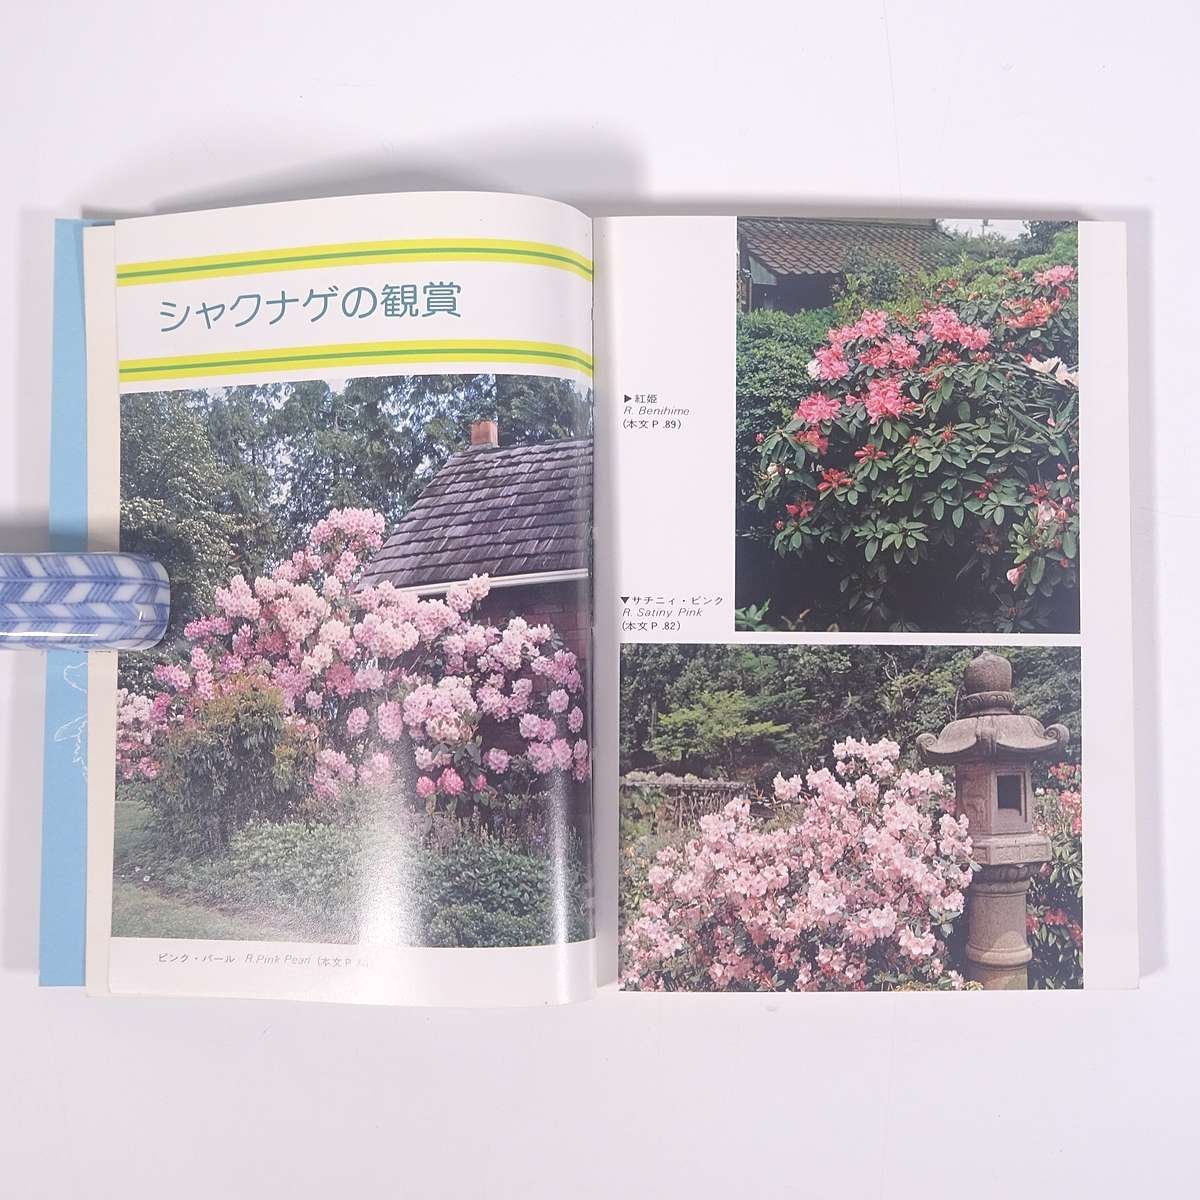  amateur rhododendron. flower peace rice field . one ..... .. practical use library .... .. corporation 1976 separate volume gardening gardening plant 